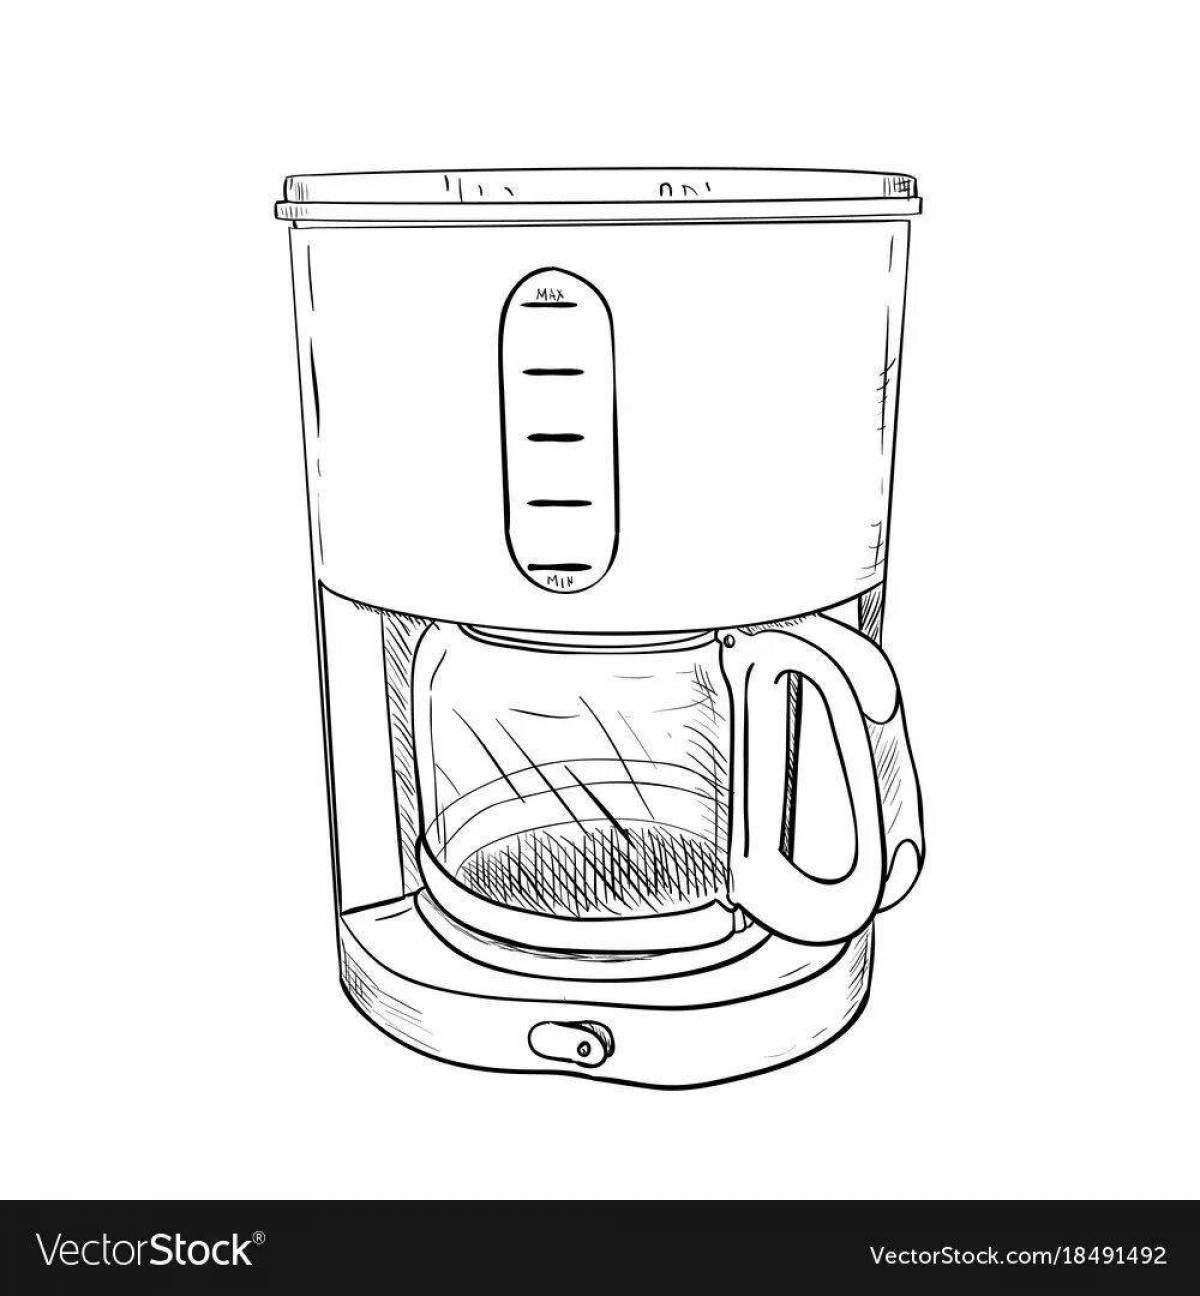 Colorful coffee machine coloring page